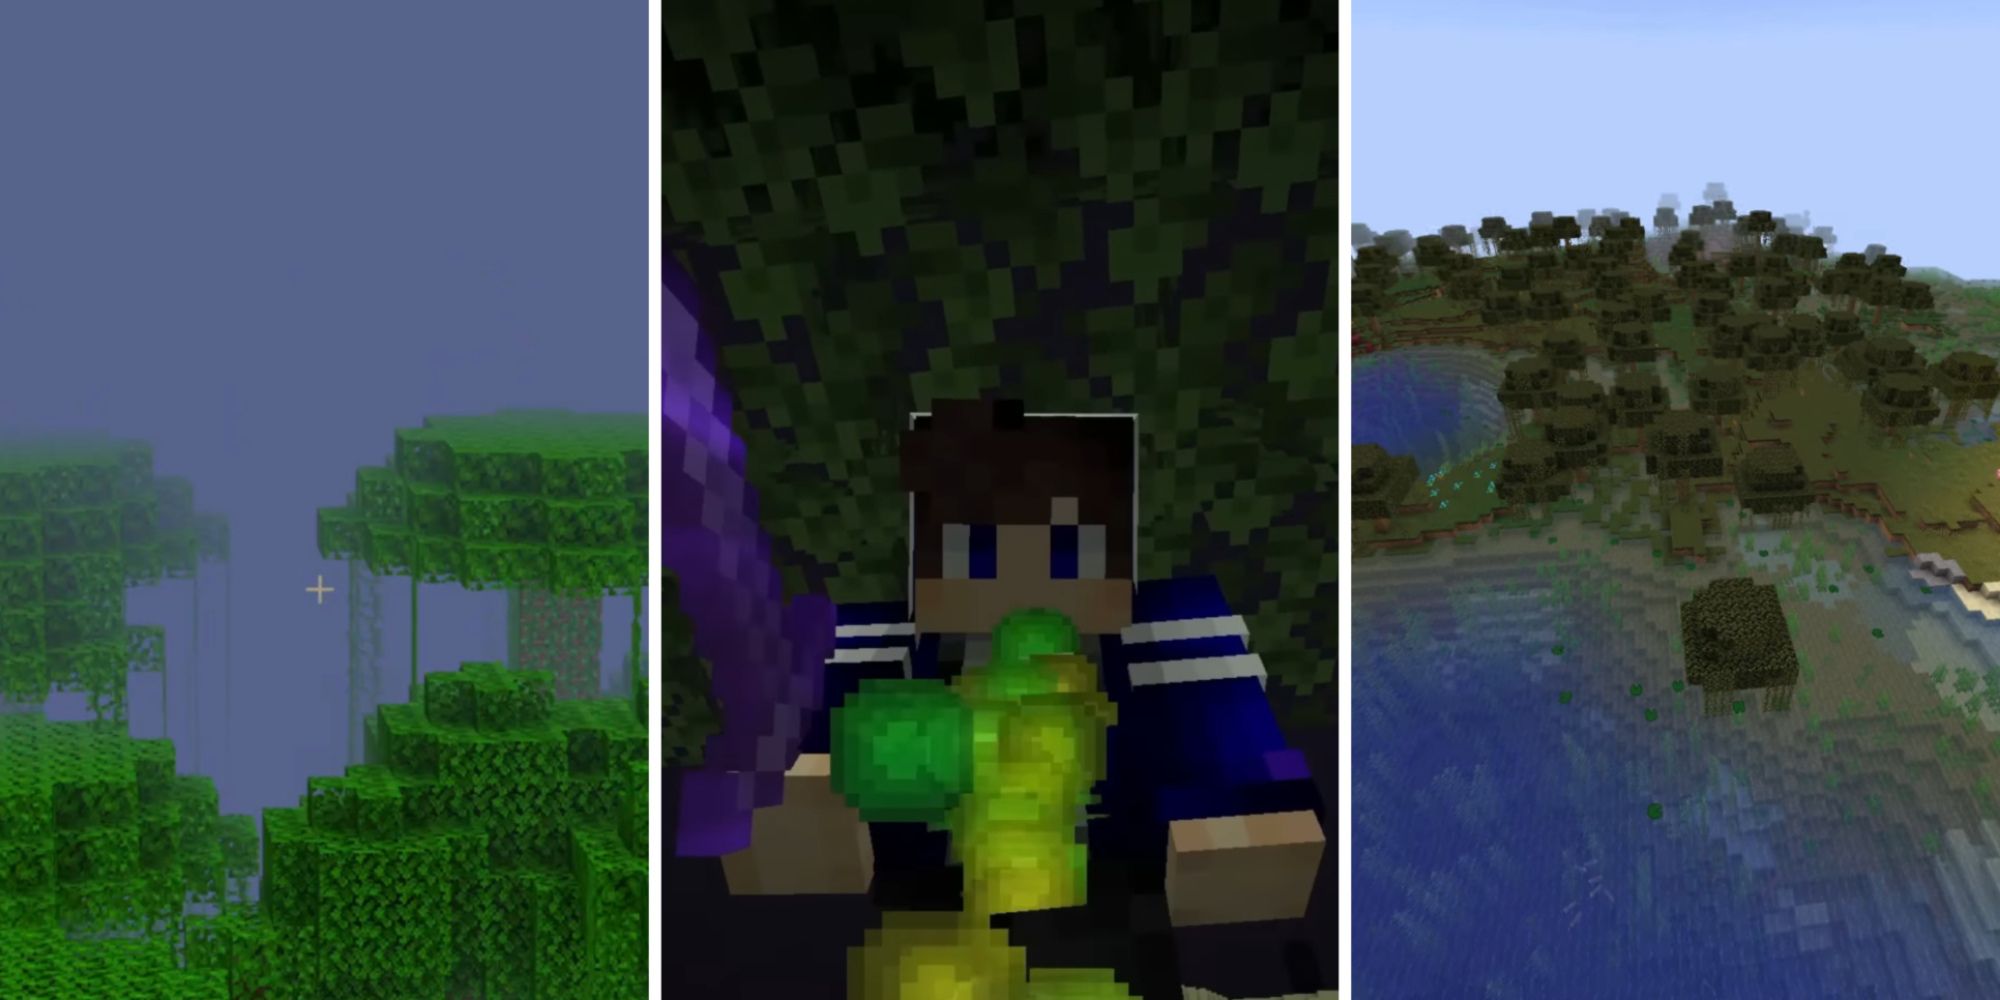 From left to right, playing with a low render distance in Minecraft, collecting experience orbs in Minecraft, and testing biome transition settings in Minecraft